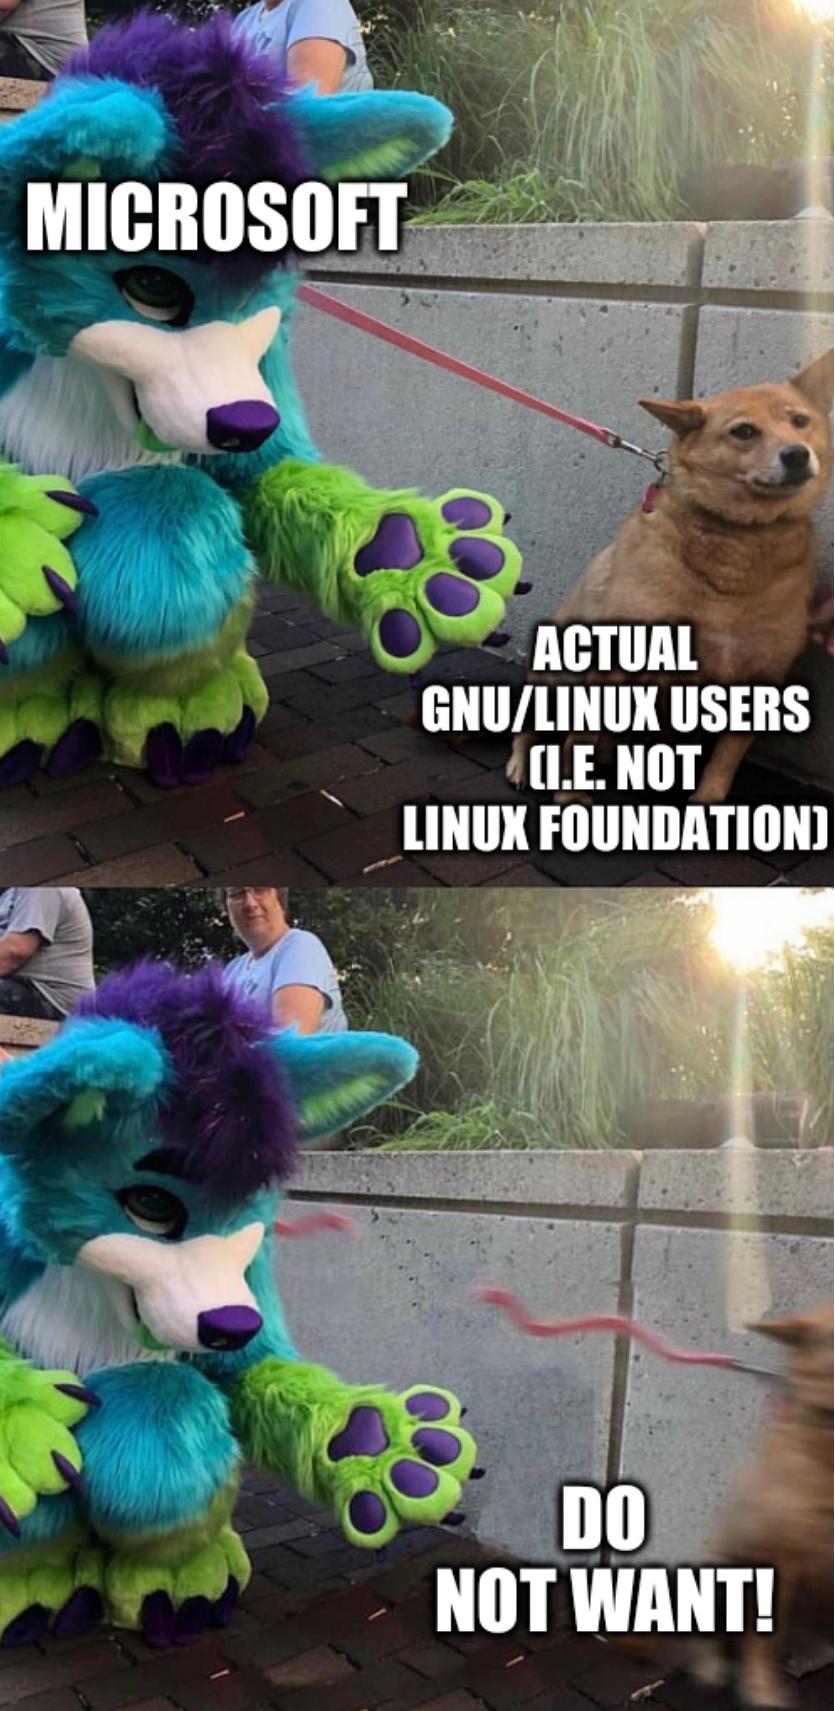 Furry scares: Microsoft; Actual GNU/Linux users (i.e. Not Linux Foundation); Do not want!